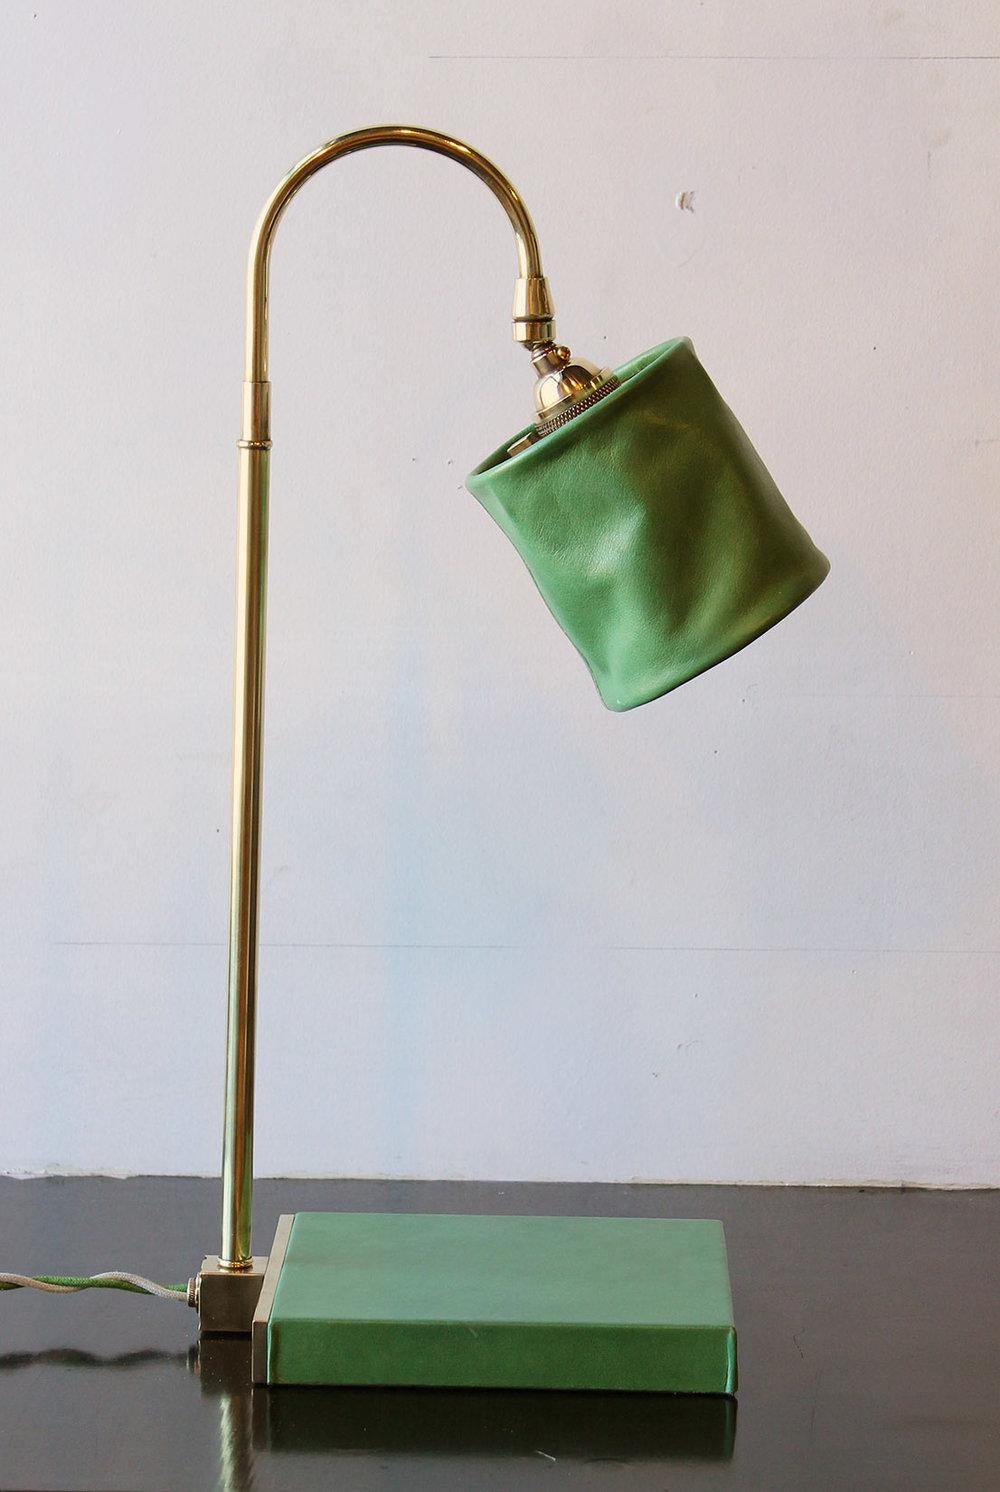 Series01 Desk Lamp, Hand-Dyed Blush 'Pink' Leather, Polished Nickel-Plated Brass For Sale 5